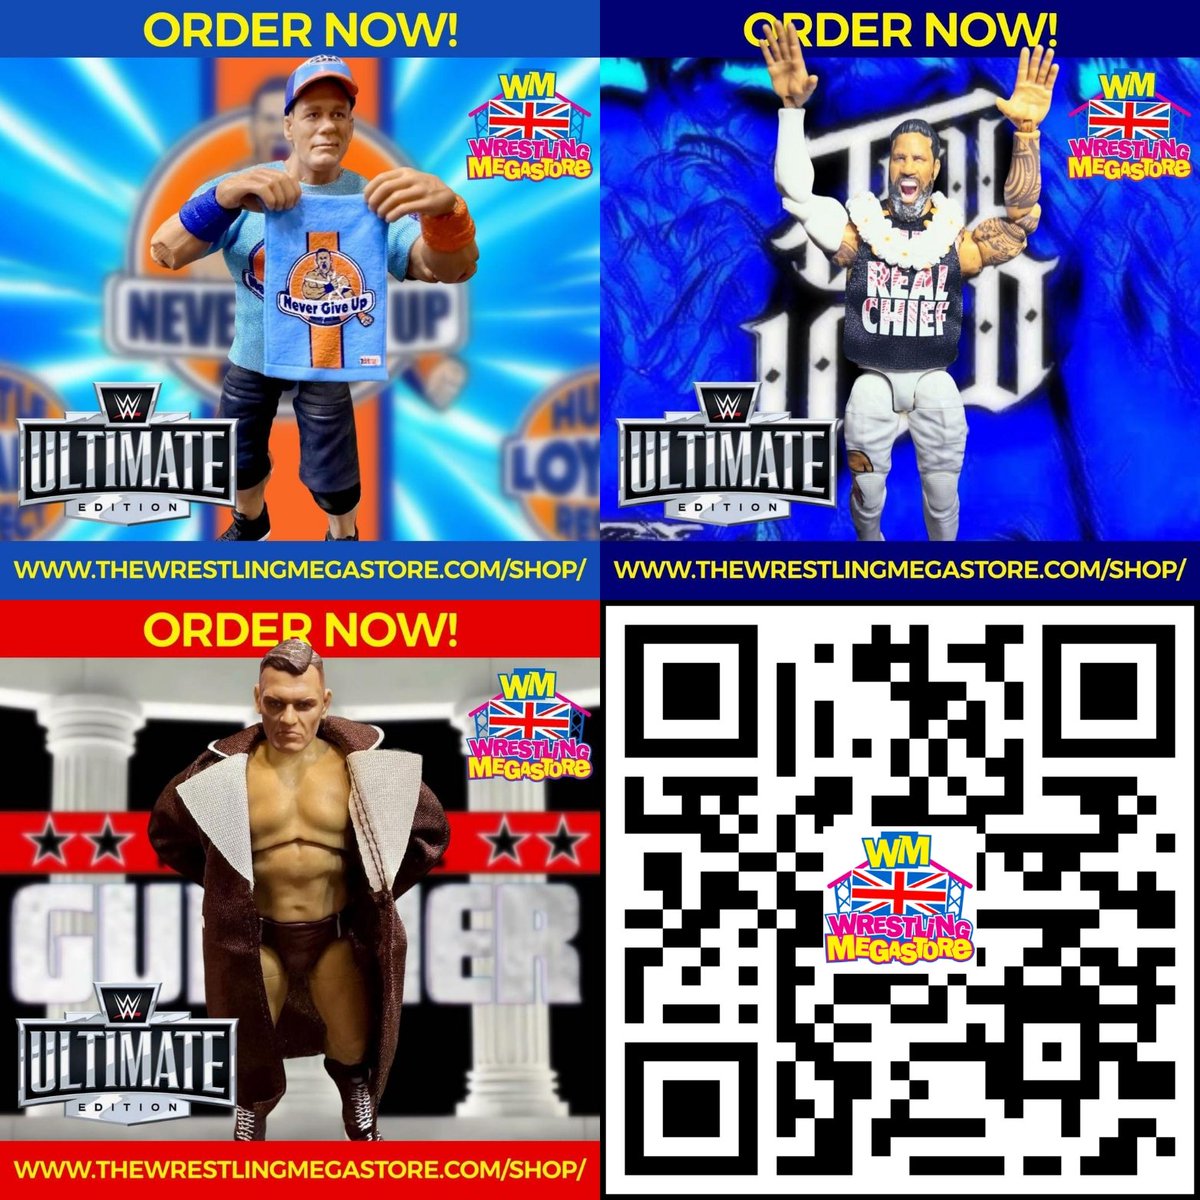 MATTEL PRE ORDERS GALORE!! Some pre-orders have went up today and proving very popular! Secure yours now with just a shopping deposit required until arrival 👏👏 thewrestlingmegastore.com/shop/